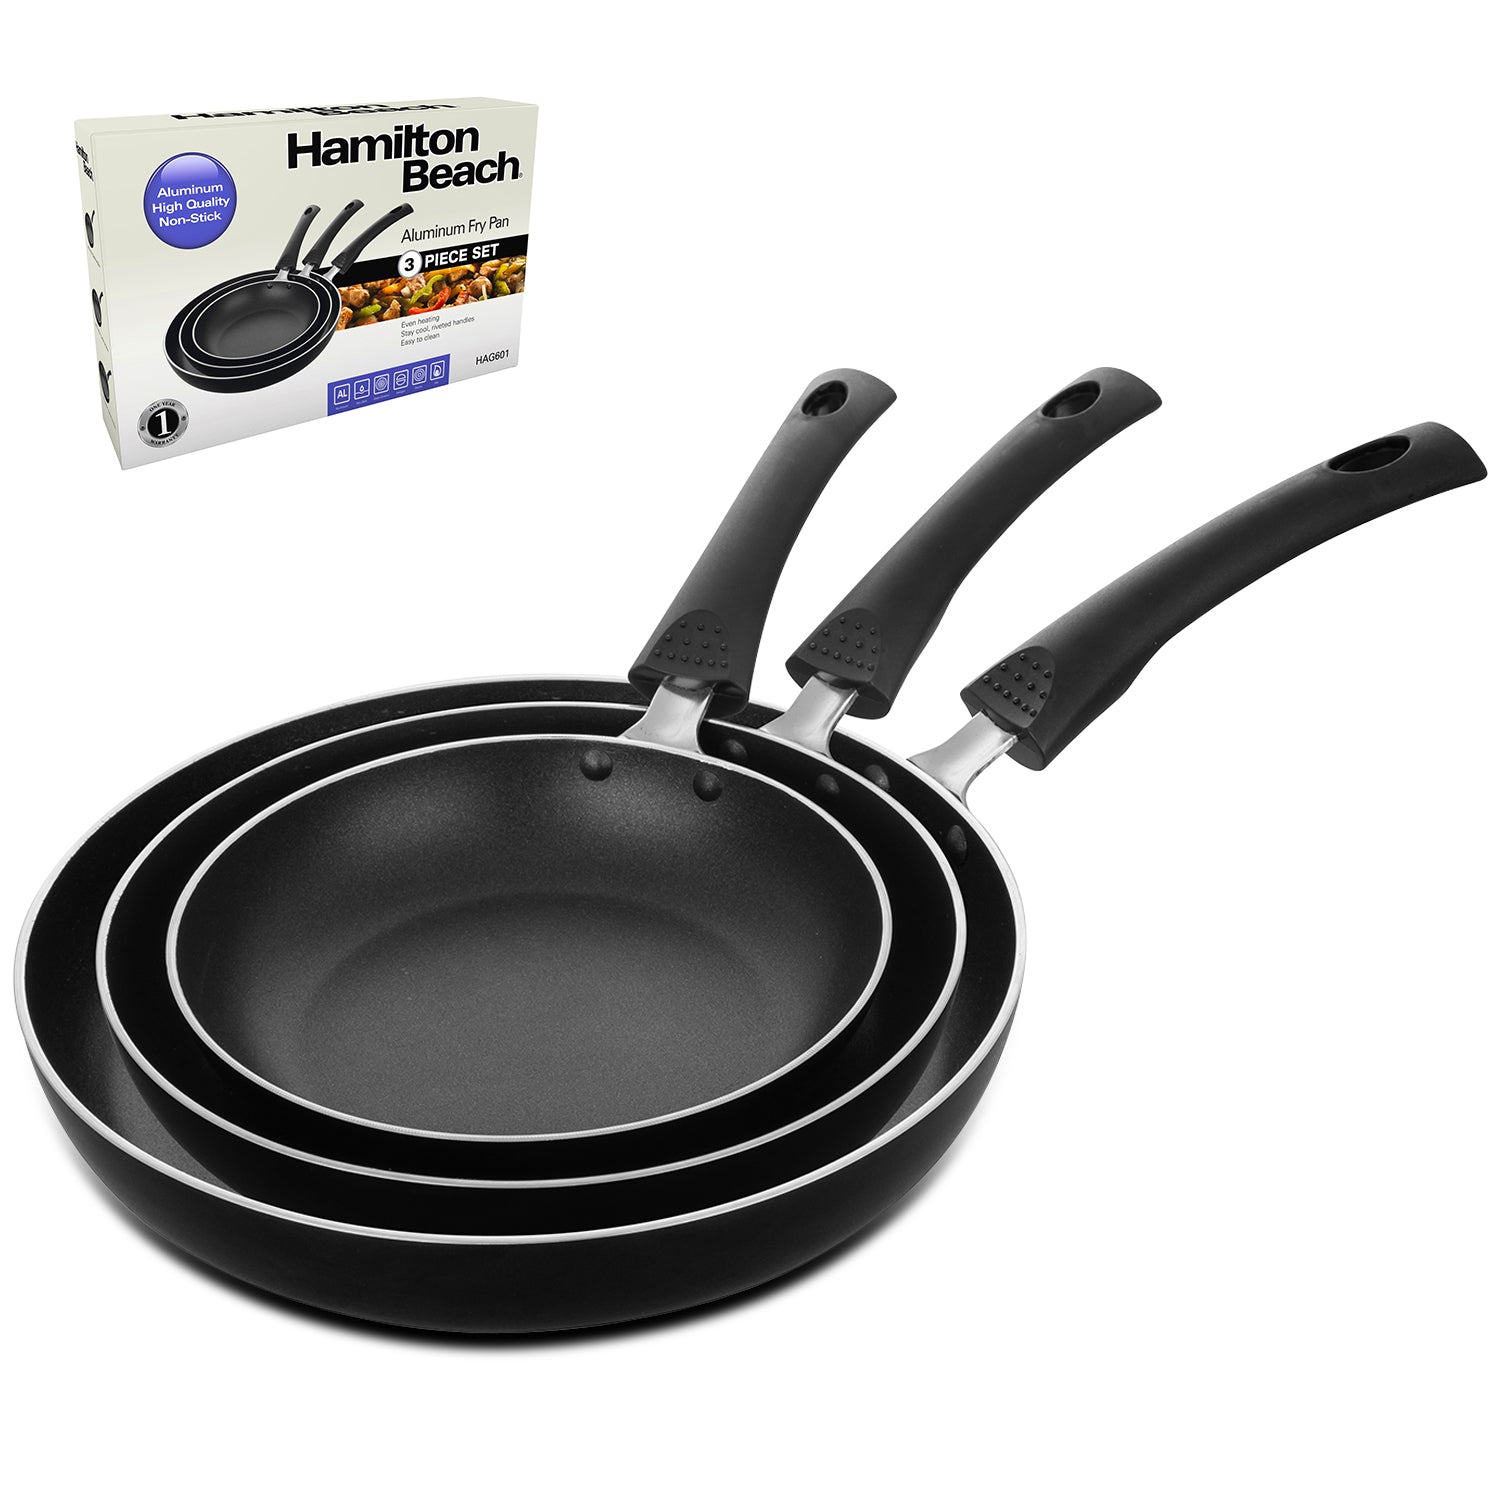 Hamilton Beach Aluminum Fry Pan 3pc Set 8, 9.5 & 11 Inch with Riveted Fixed Handle, Nonstick Coating & Color Box Packing, Suitable for Searing, SautÃ©ing & Reheating, Easy to Clean & Heat Resistance